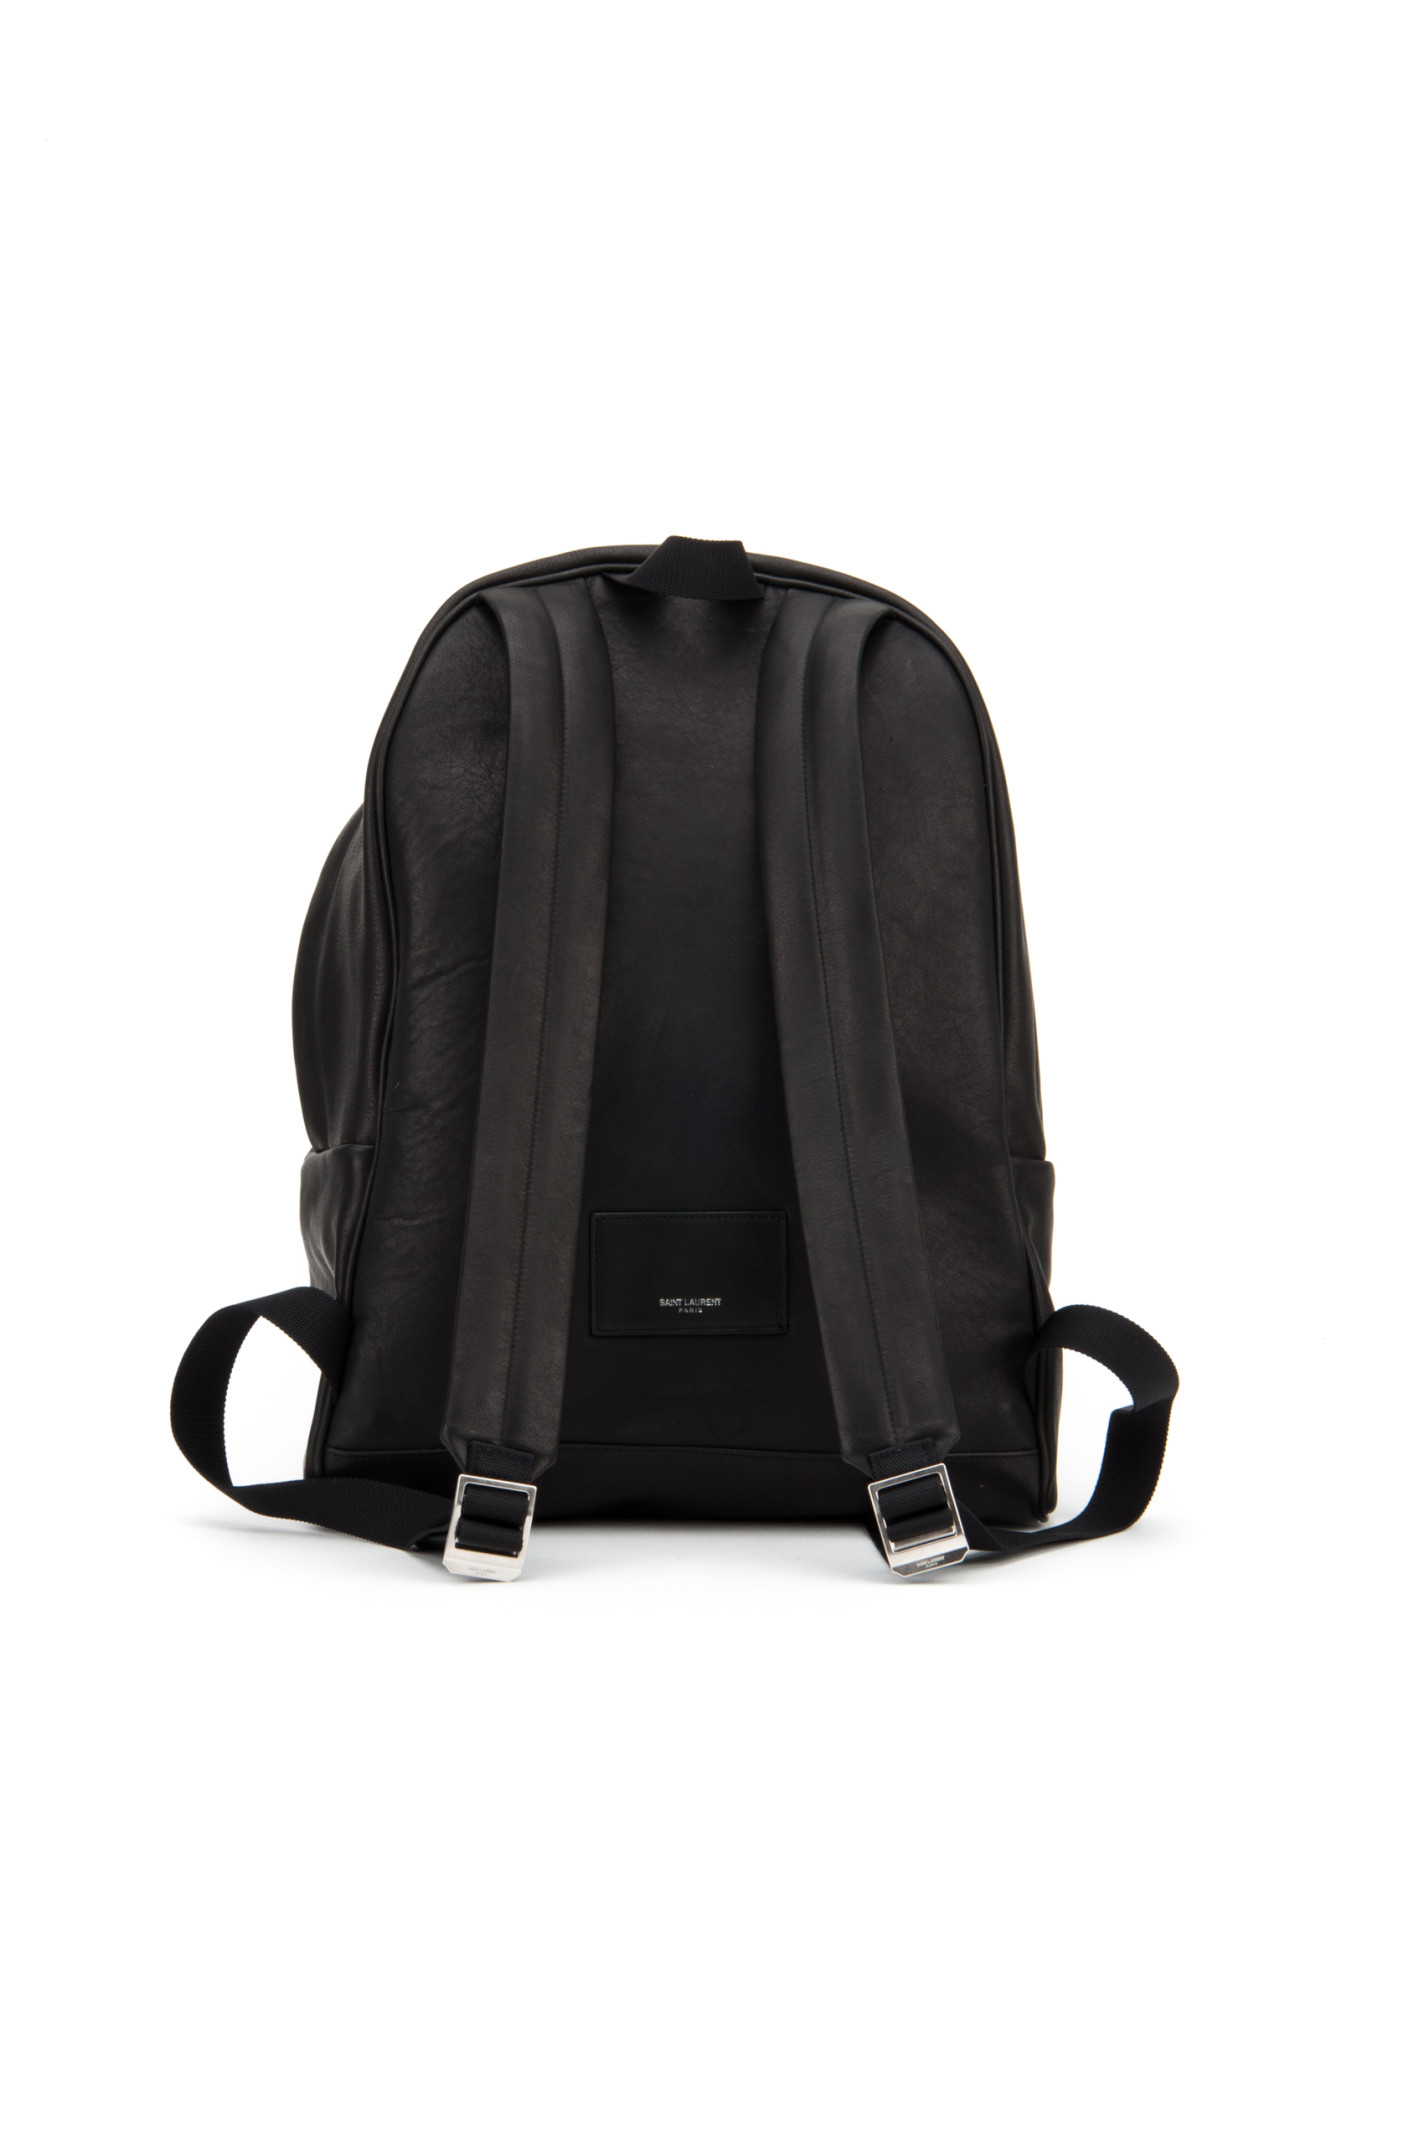 ysl leather backpack  